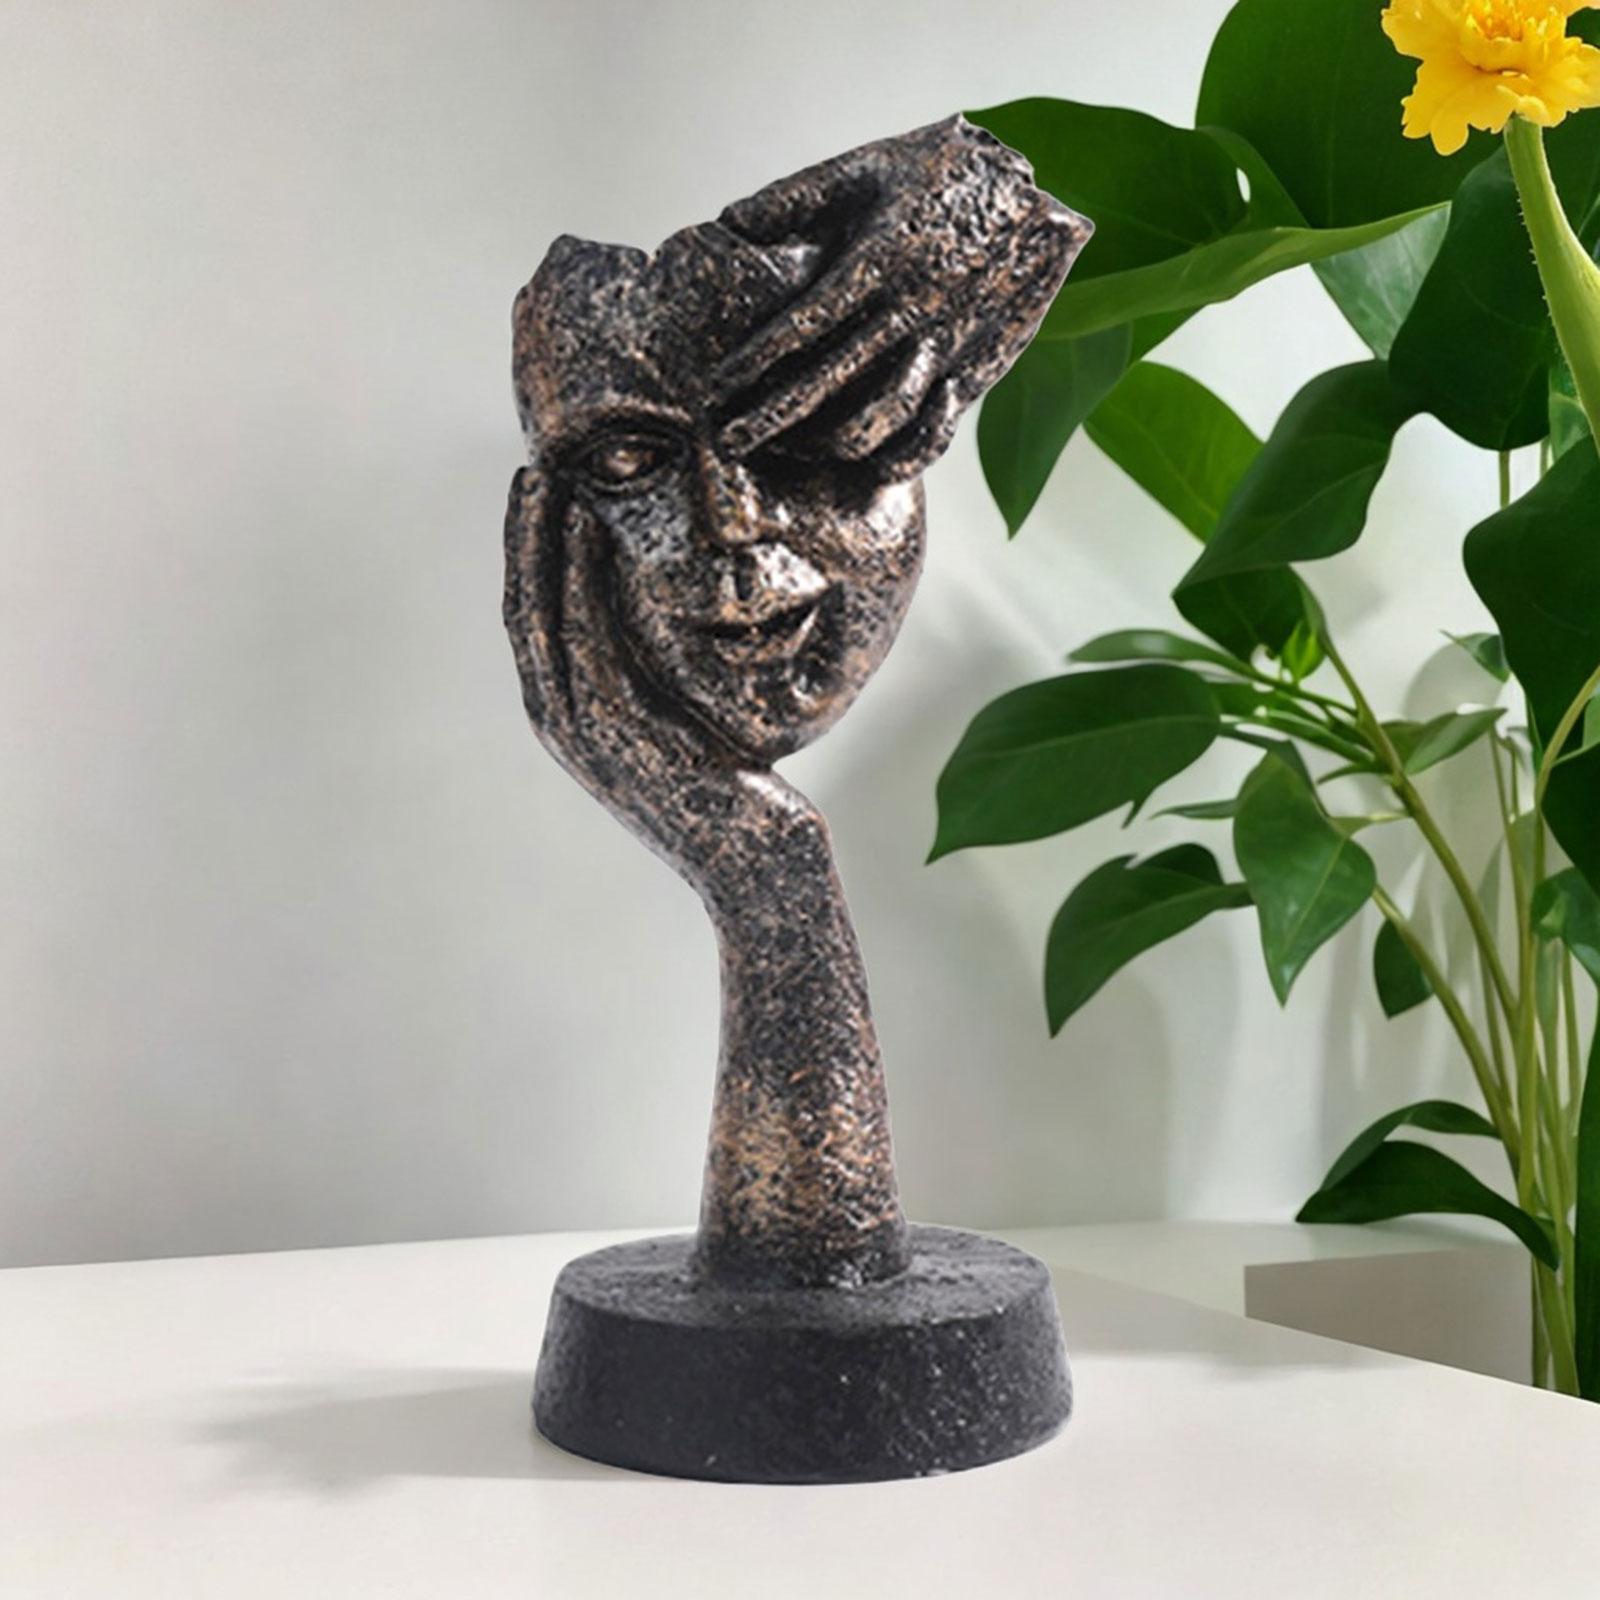 Thinker Statues Face Sculpture for Table Bookshelf Decorative Objects Office 15cmx7cm